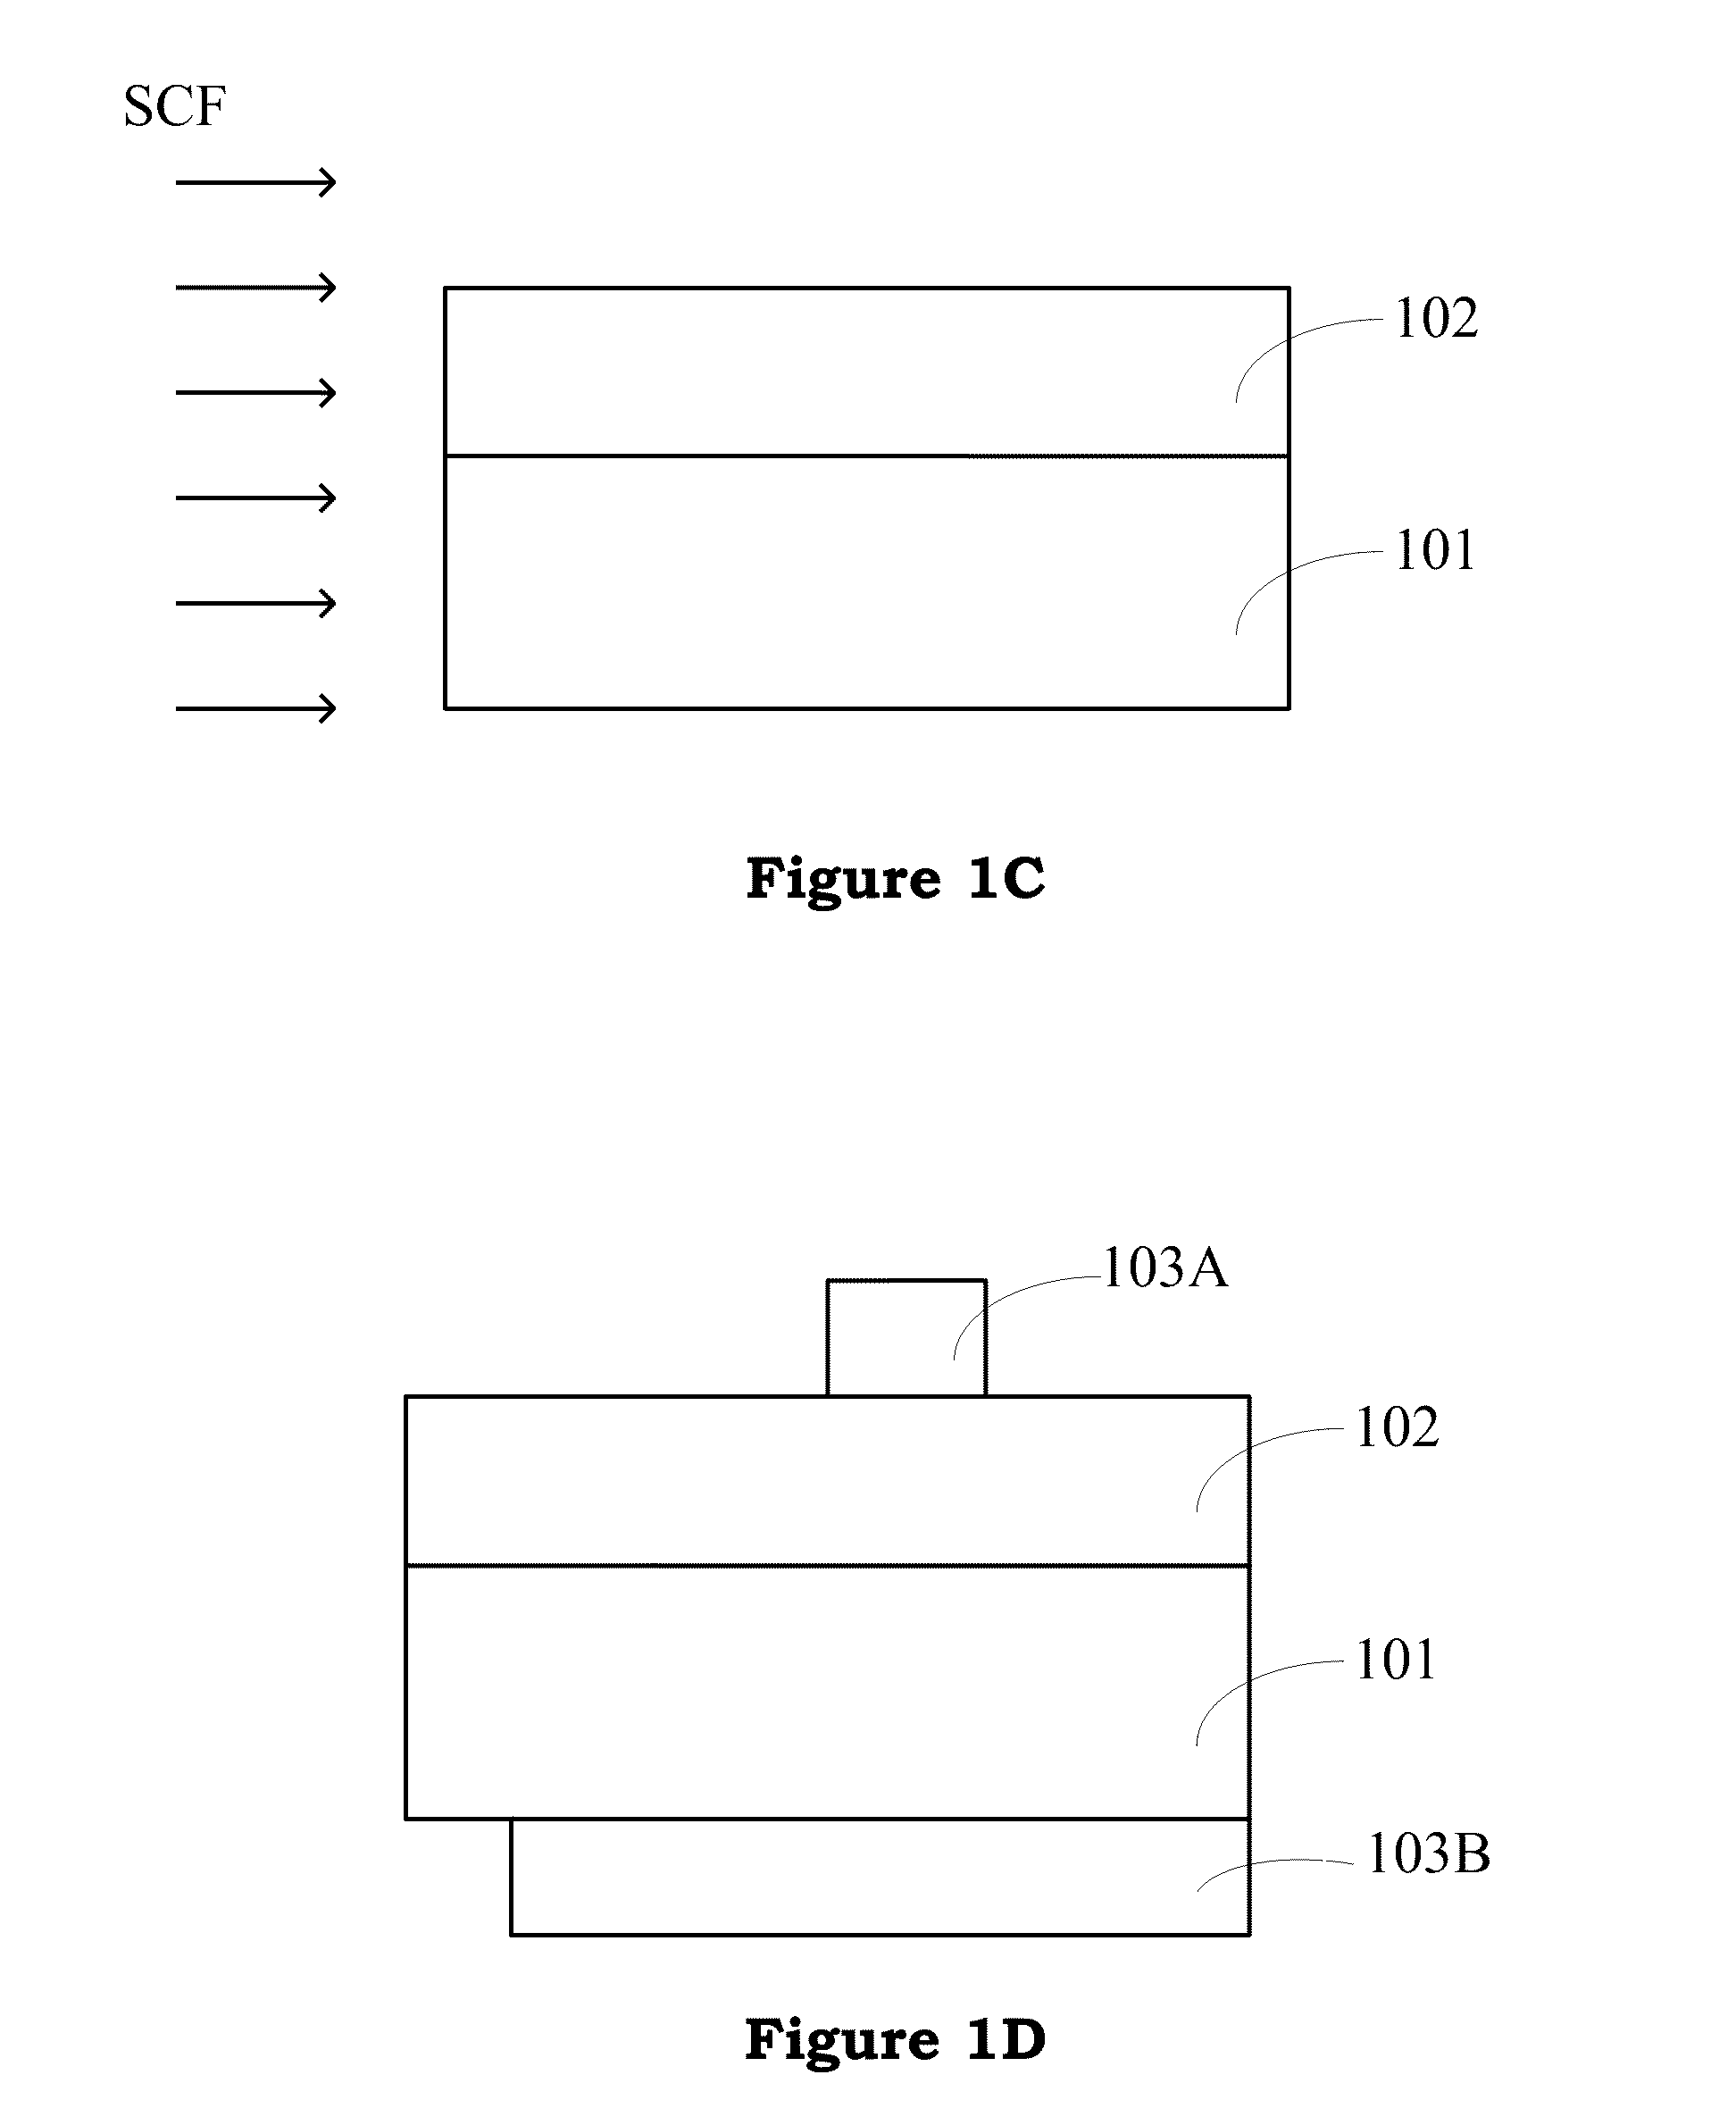 Method for forming an interfacial passivation layer on the Ge semiconductor